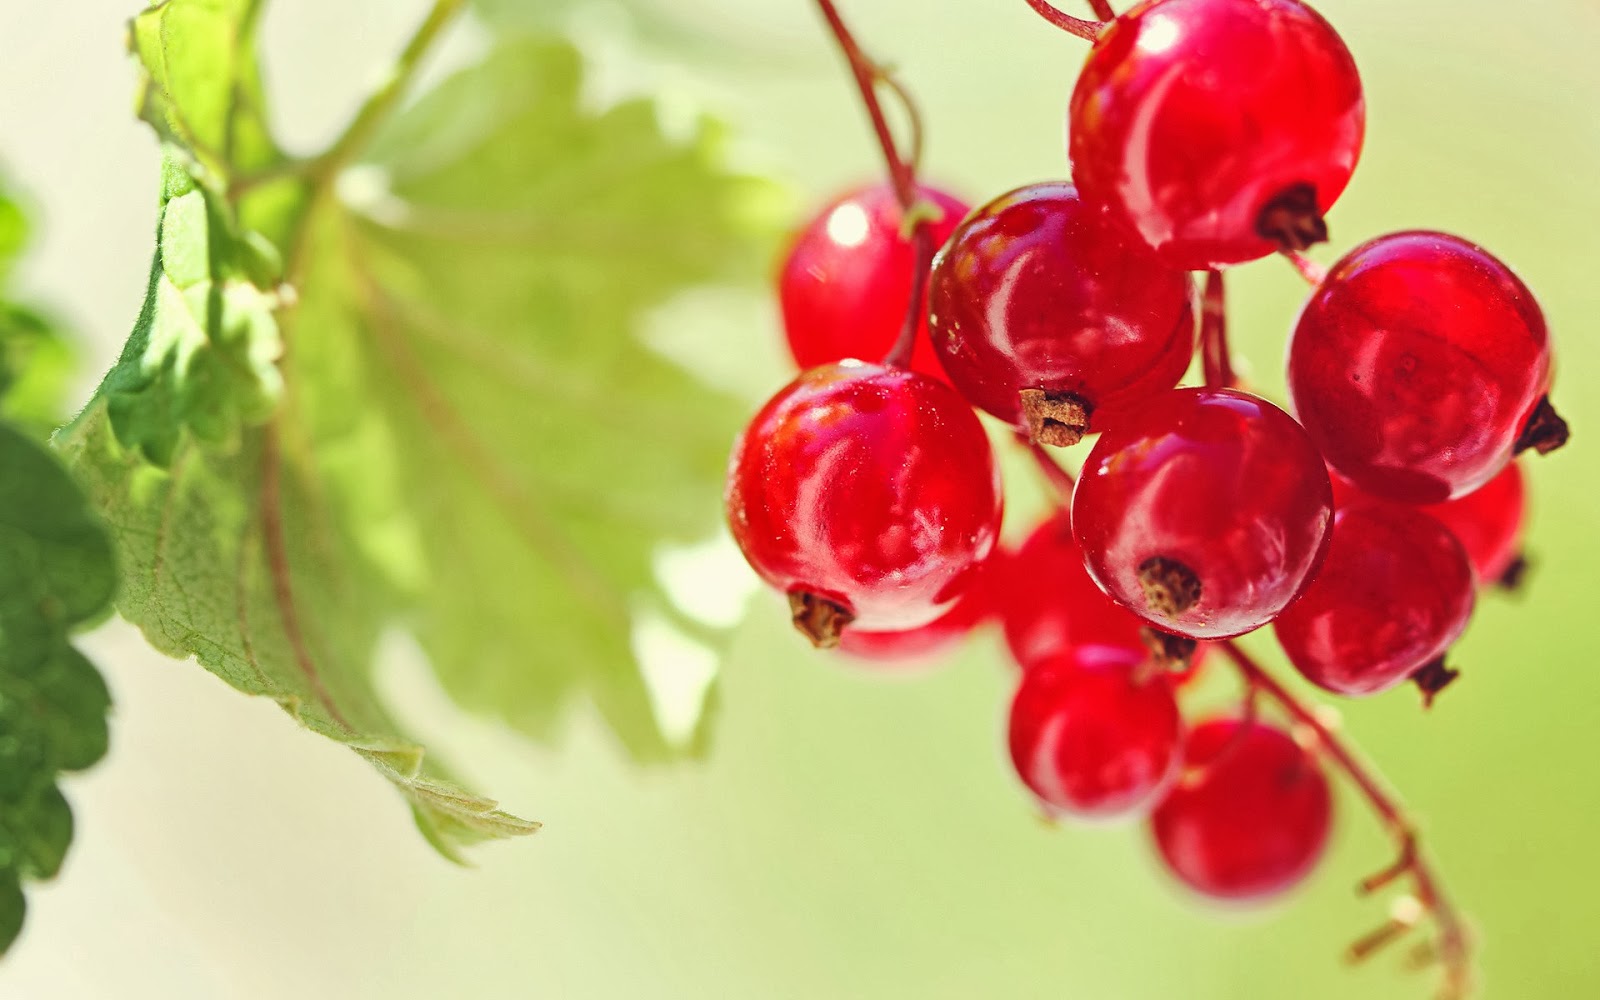 fruits wallpaper download,berry,currant,red,fruit,seedless fruit